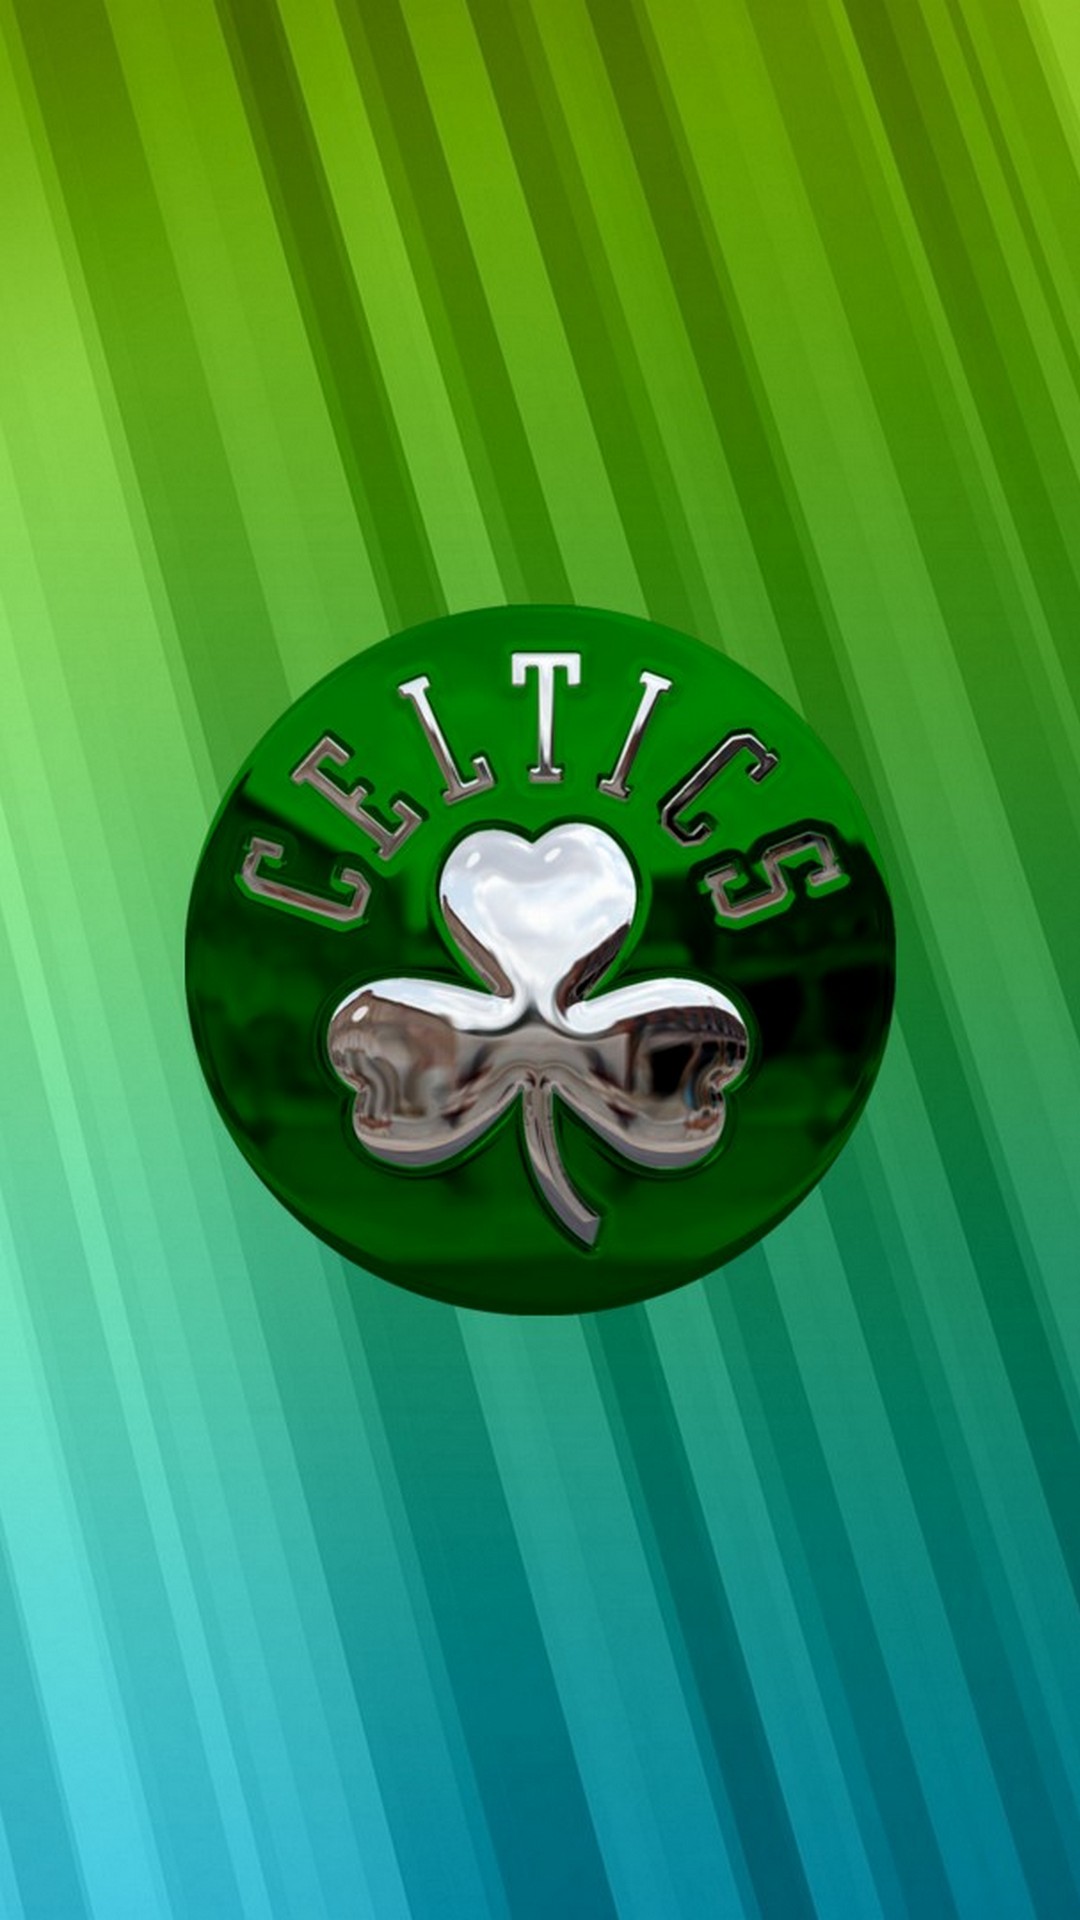 iPhone Wallpaper Boston Celtics Logo with resolution 1080X1920 pixel. You can make this wallpaper for your iPhone 5, 6, 7, 8, X backgrounds, Mobile Screensaver, or iPad Lock Screen